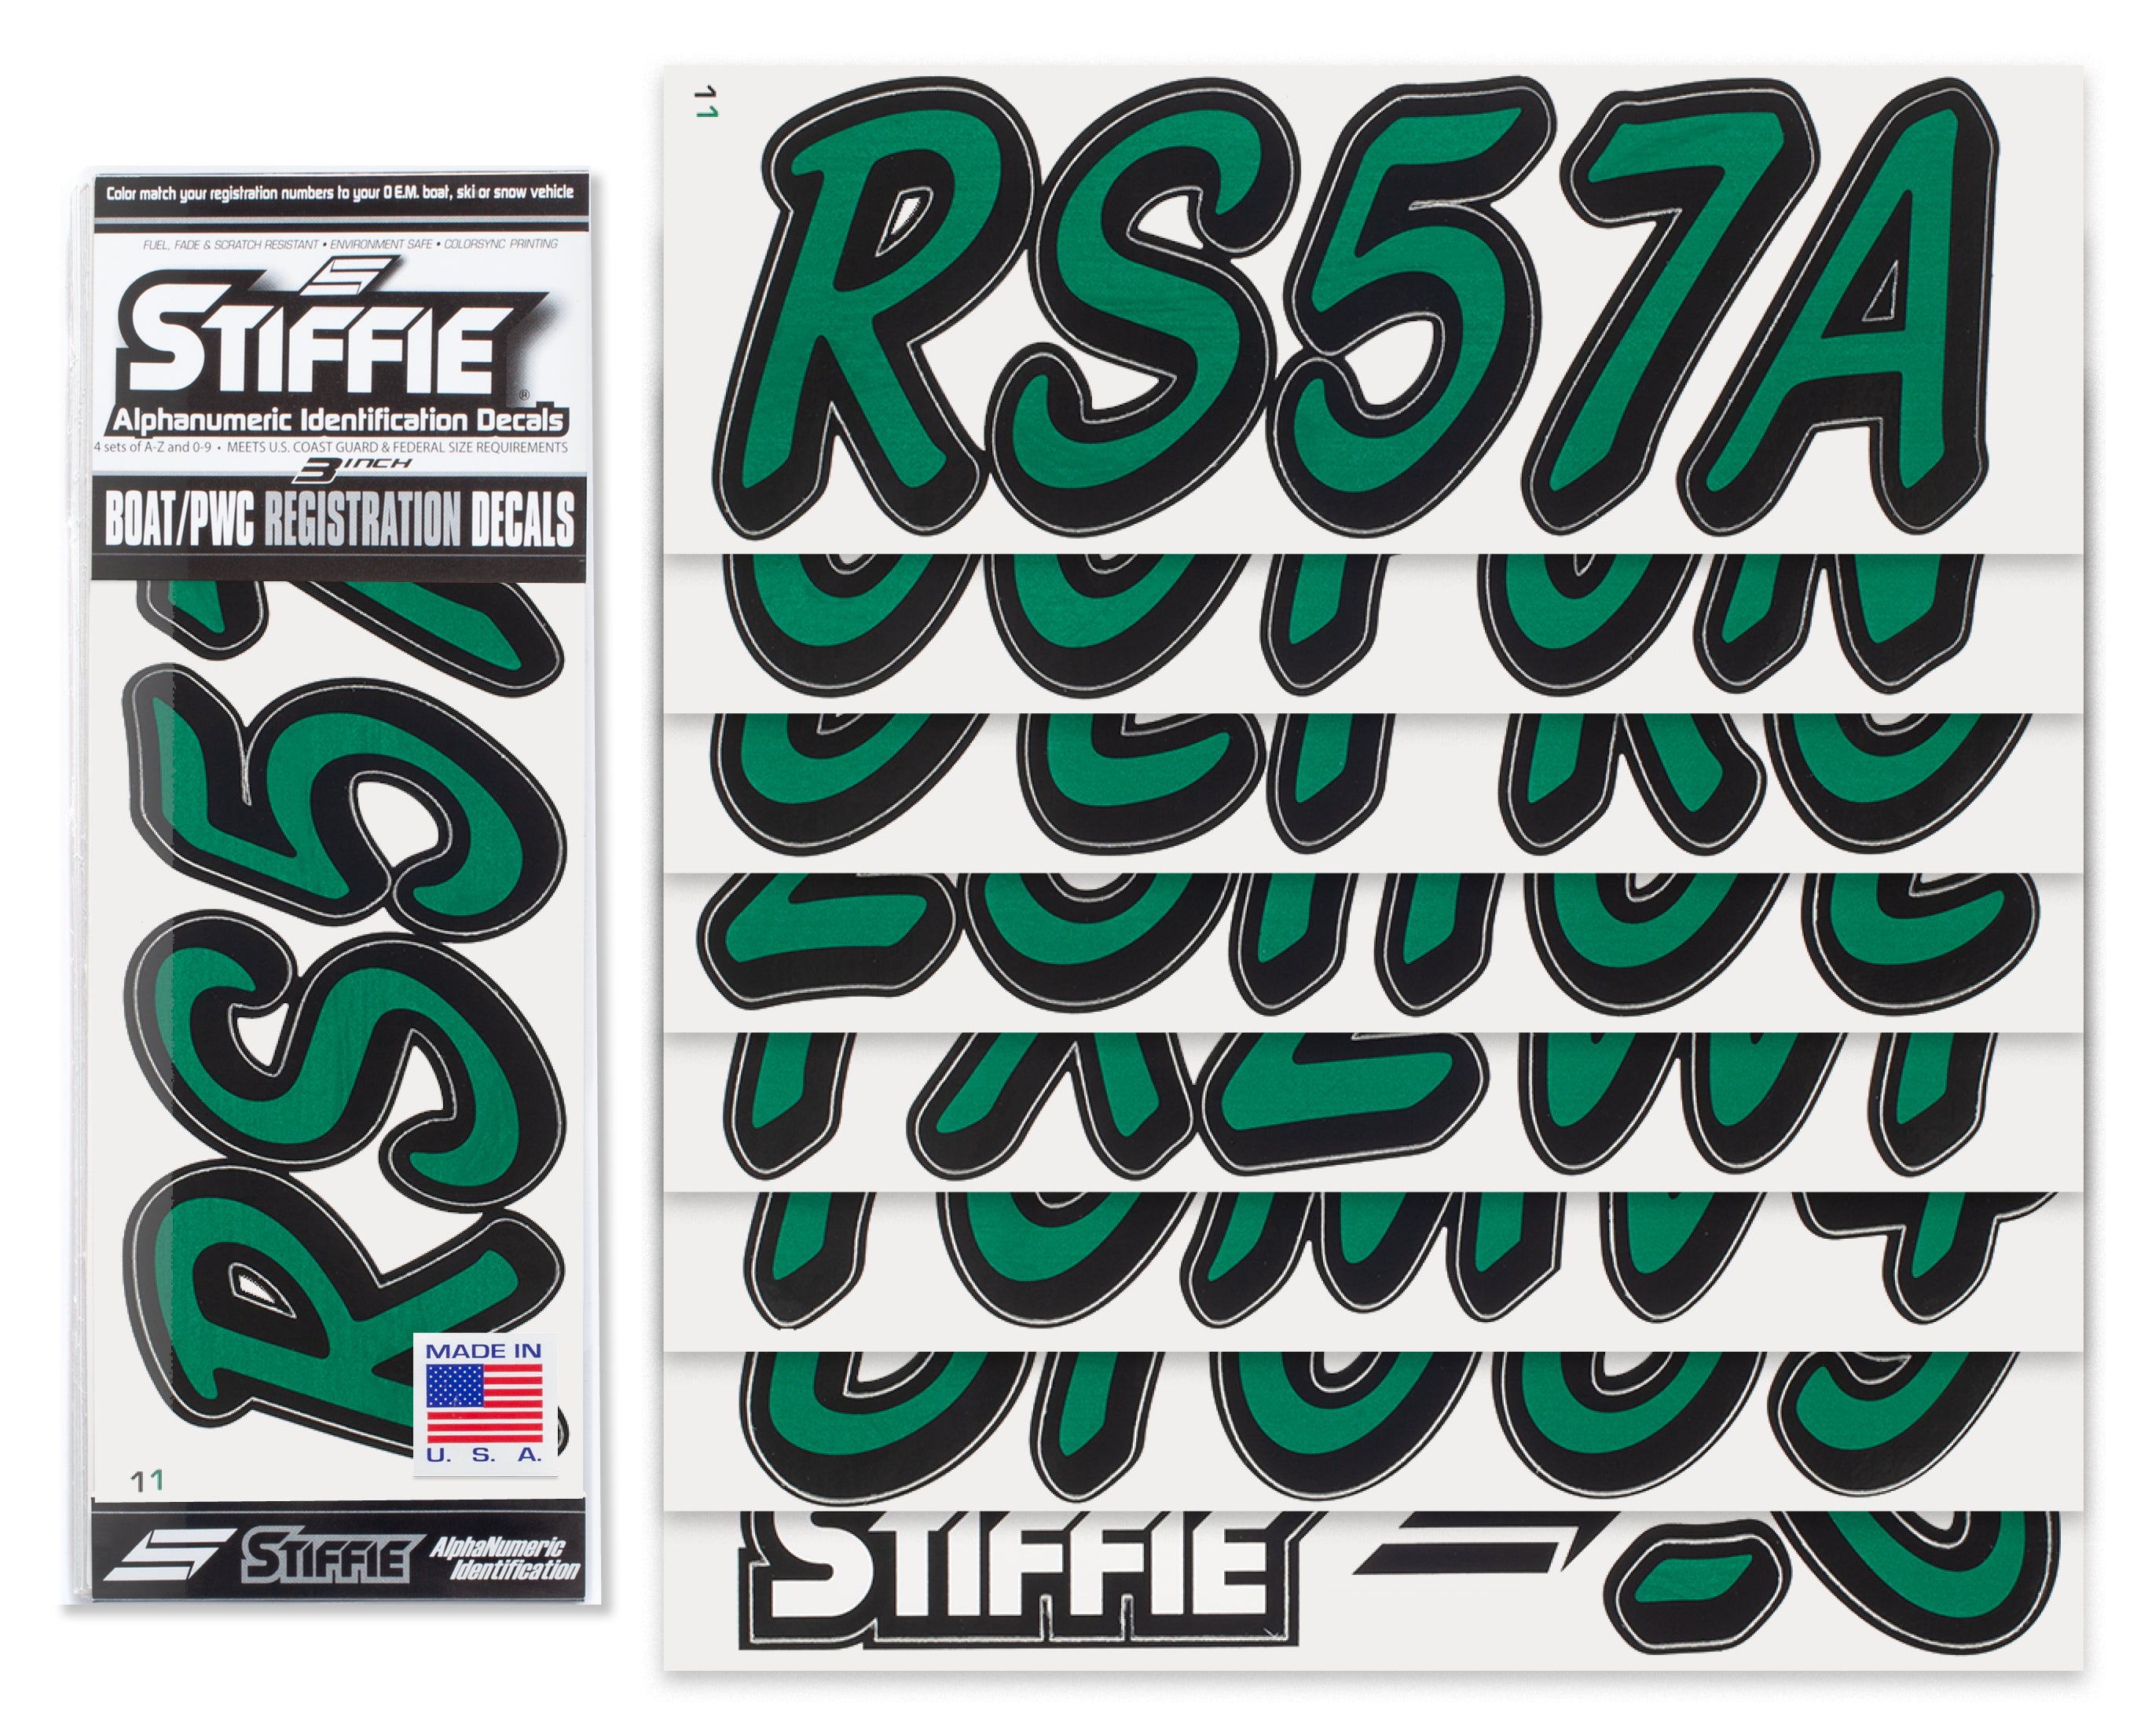 STIFFIE Whipline Solid Racing Green/Black 3" Alpha-Numeric Registration Identification Numbers Stickers Decals for Boats & Personal Watercraft